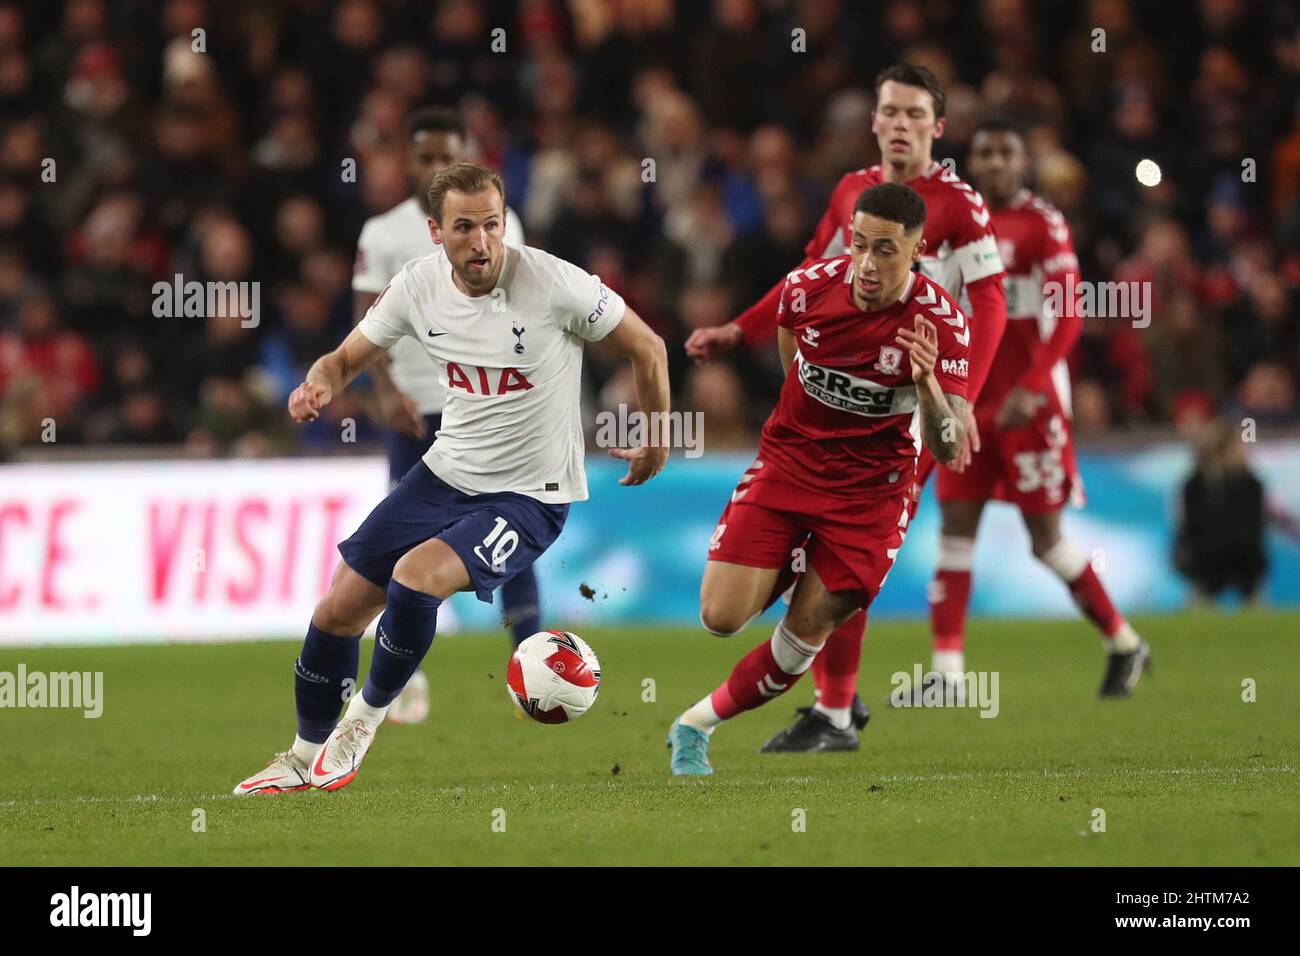 MIDDLESBROUGH, UK. MAR 1ST Tottenham Hotspur's Harry Kane and Marcus Tavernier of Middlesbrough during the FA Cup Fifth Round match between Middlesbrough and Tottenham Hotspur at the Riverside Stadium, Middlesbrough on Tuesday 1st March 2022. (Credit: Mark Fletcher | MI News) Credit: MI News & Sport /Alamy Live News Stock Photo